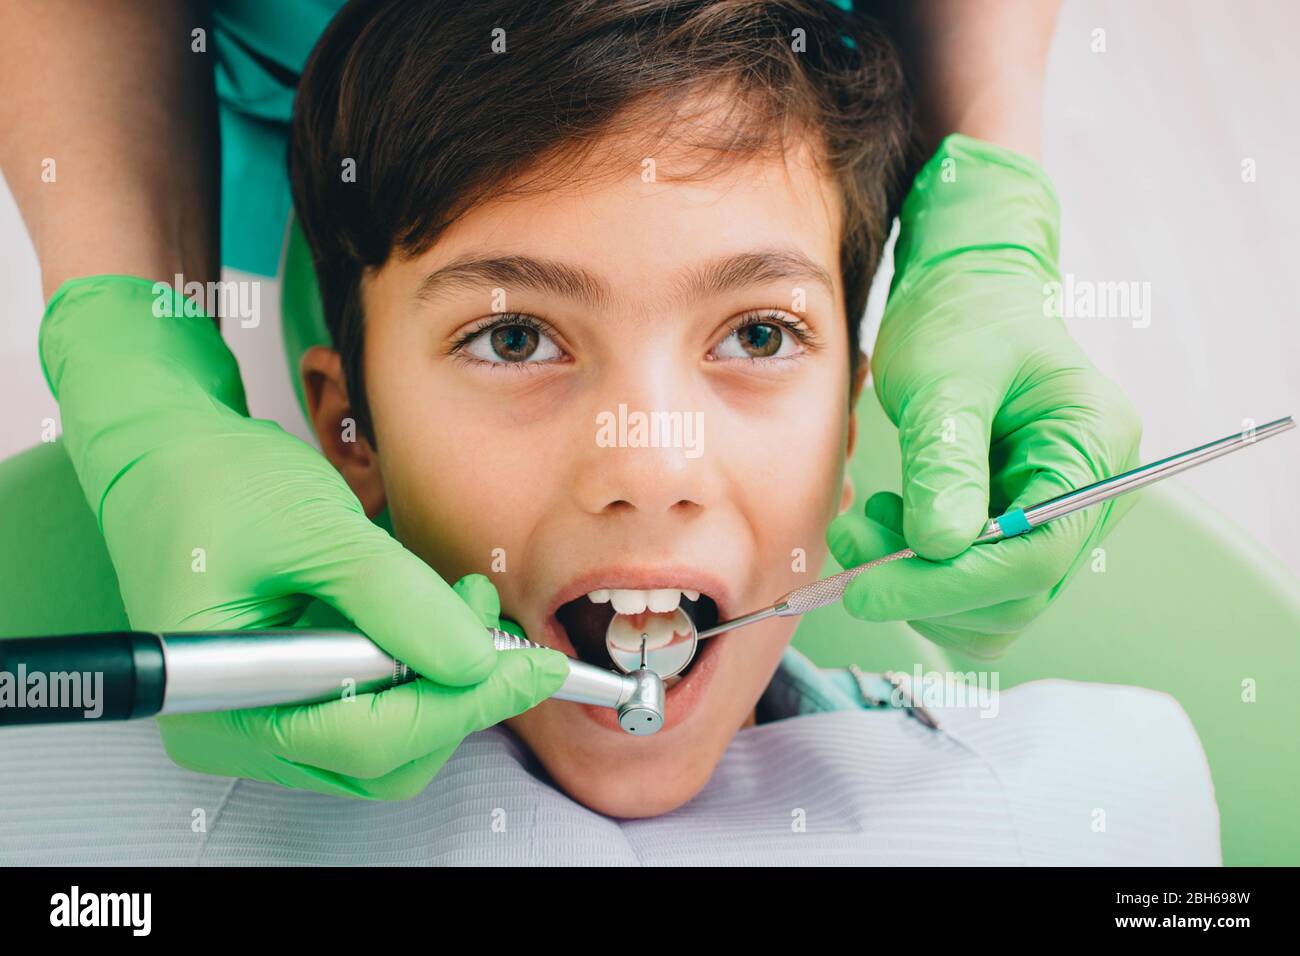 Little boy receiving teeth treatment with dental drill, close-up Stock Photo